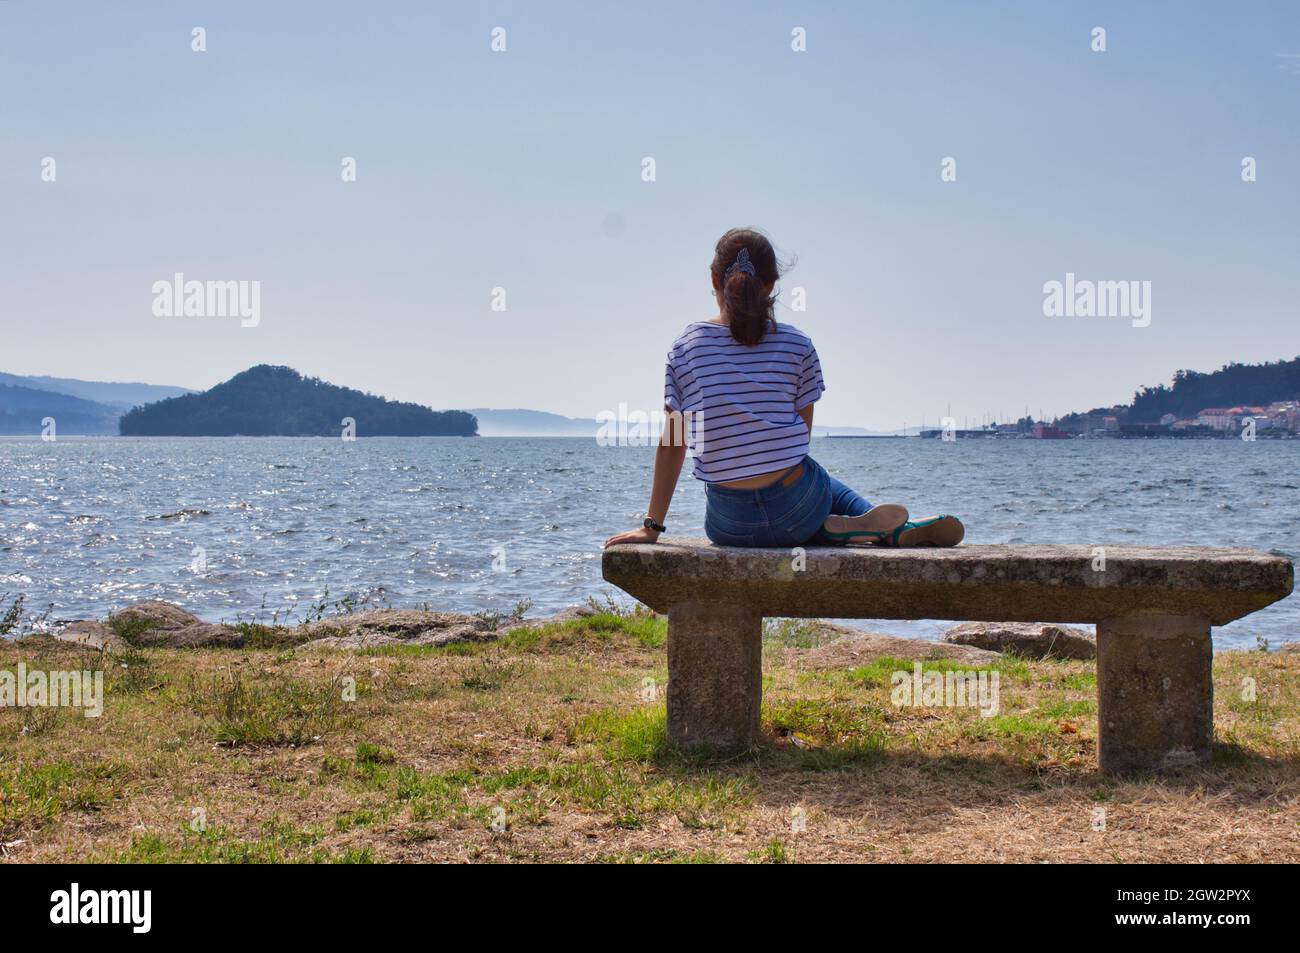 Gils Sitting On A Bench A Looking At Tambo Island In Poio Stock Photo